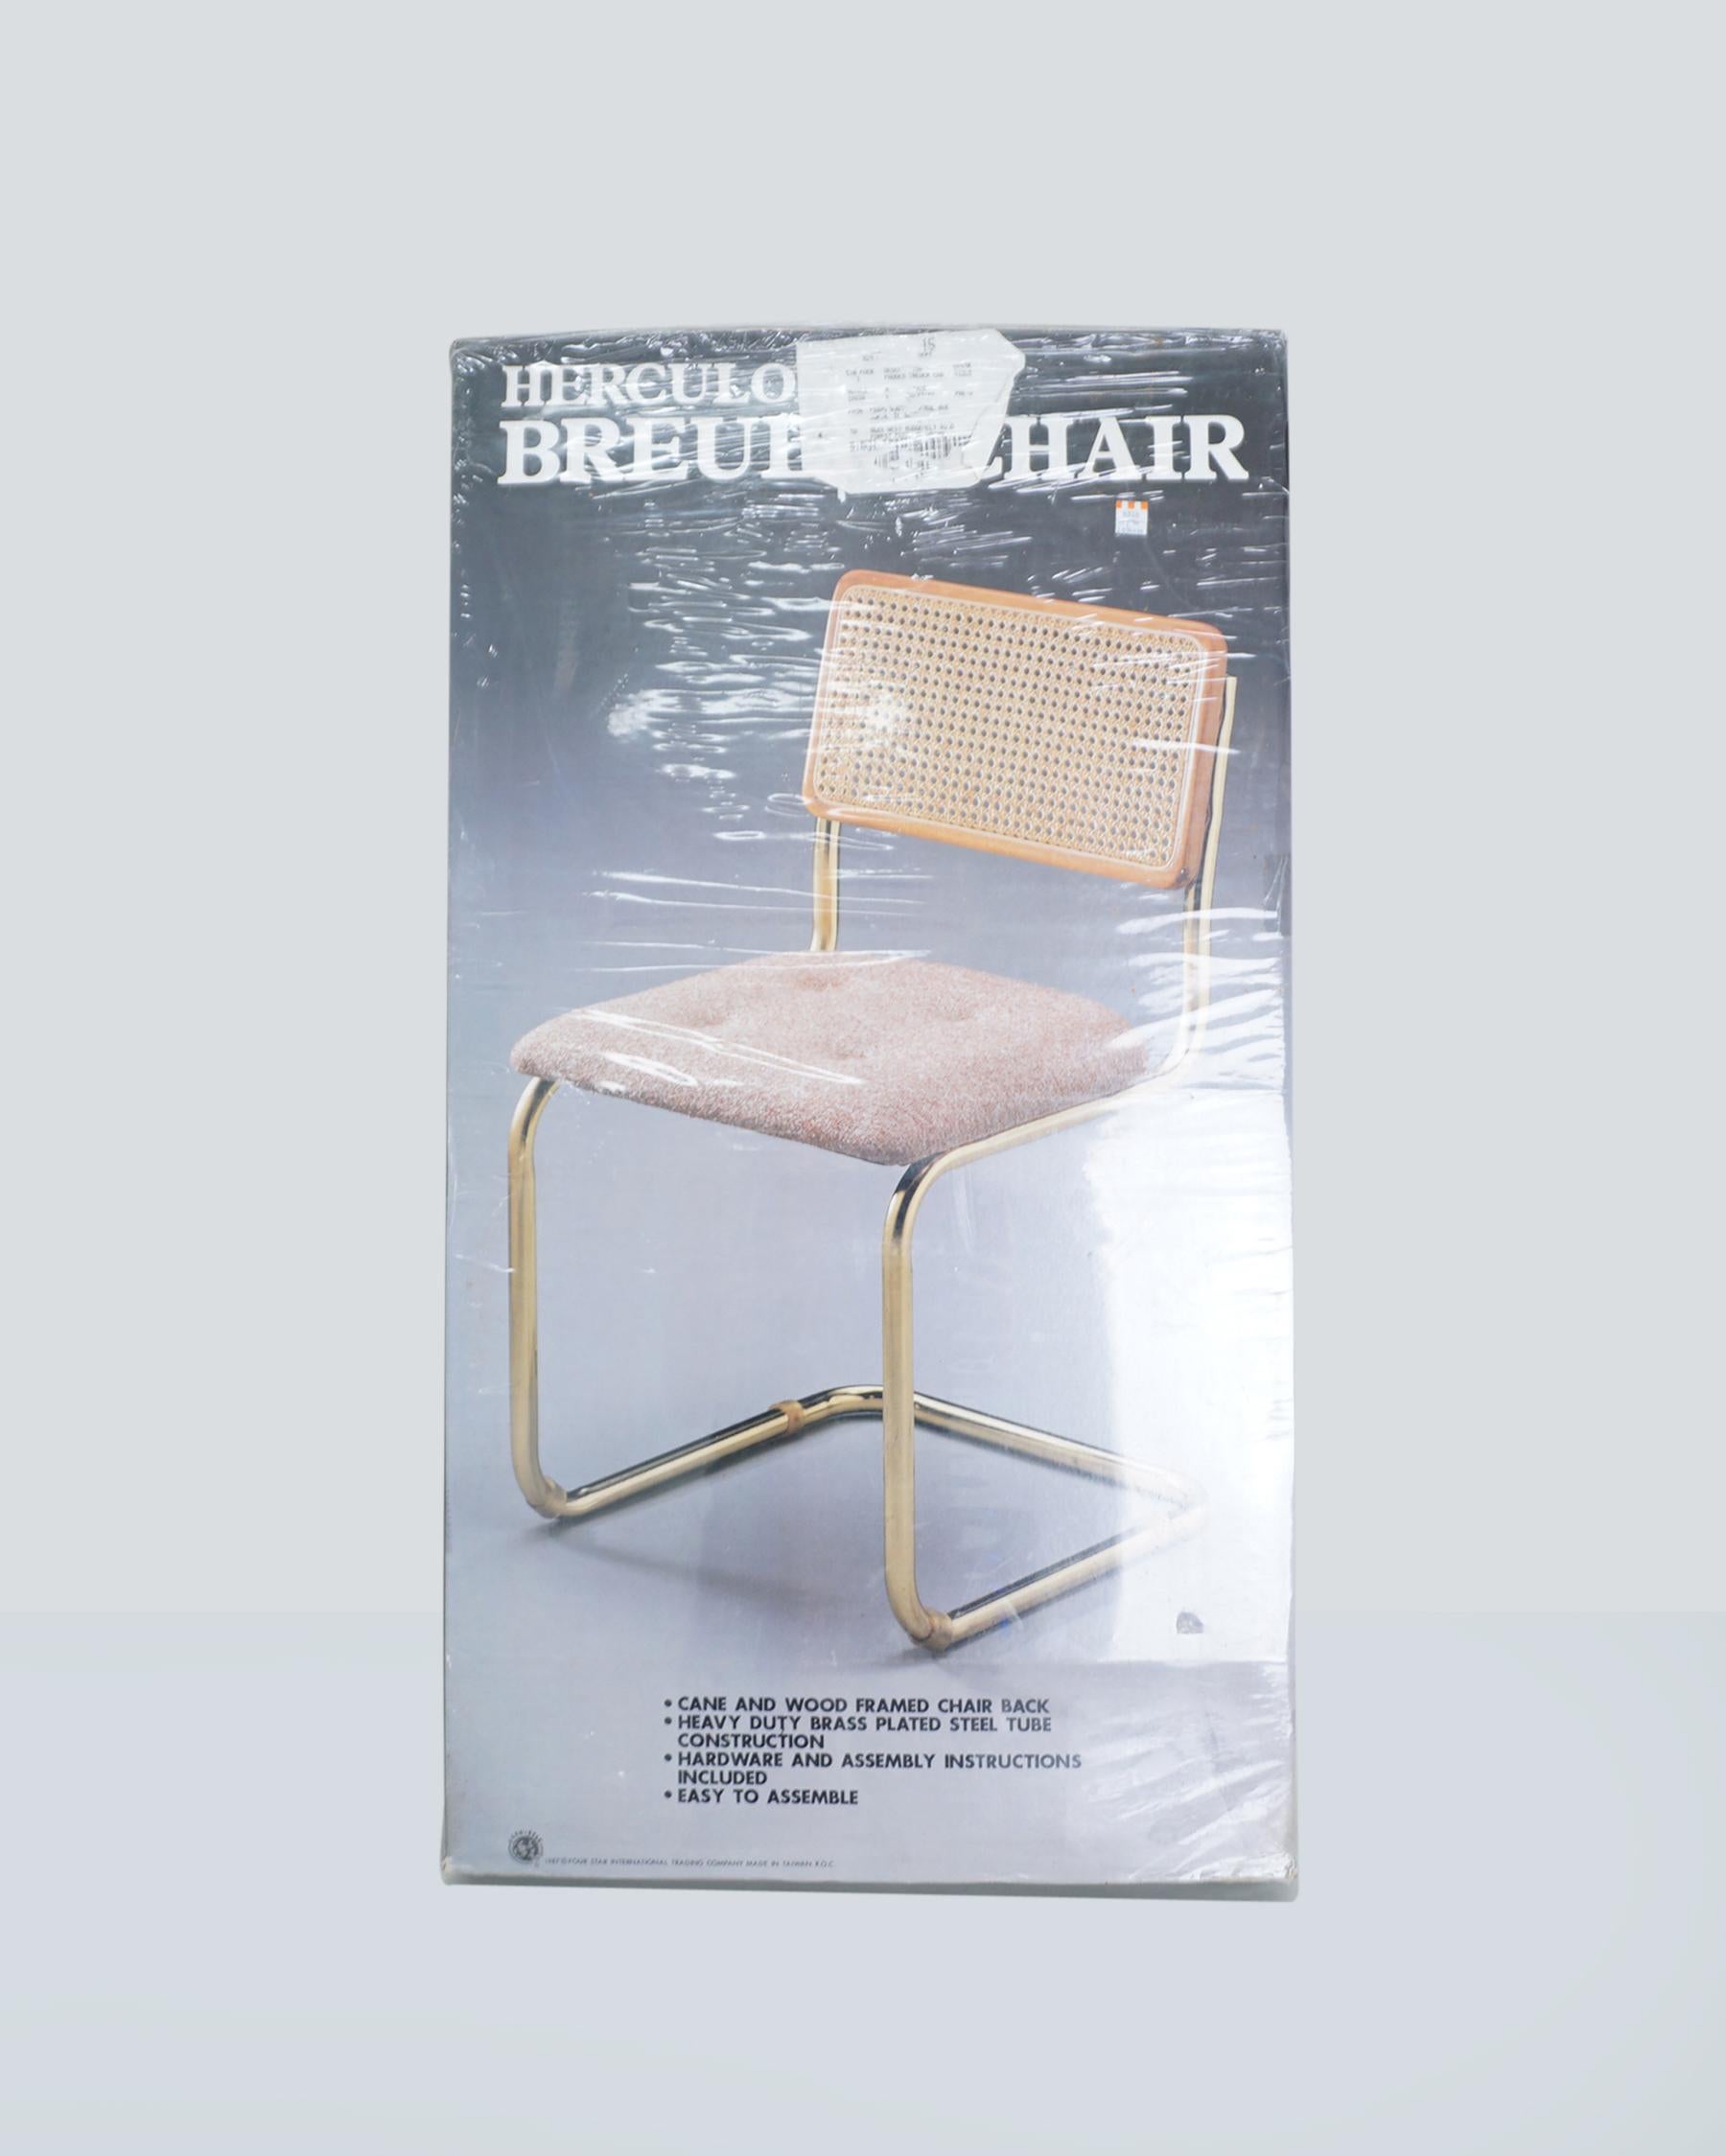 1987 Herculon Breuer chair, for the Cesca collector, this new-in-box Breuer-style chair is likely the last of its kind. Sealed in box and ready for your assembly. 